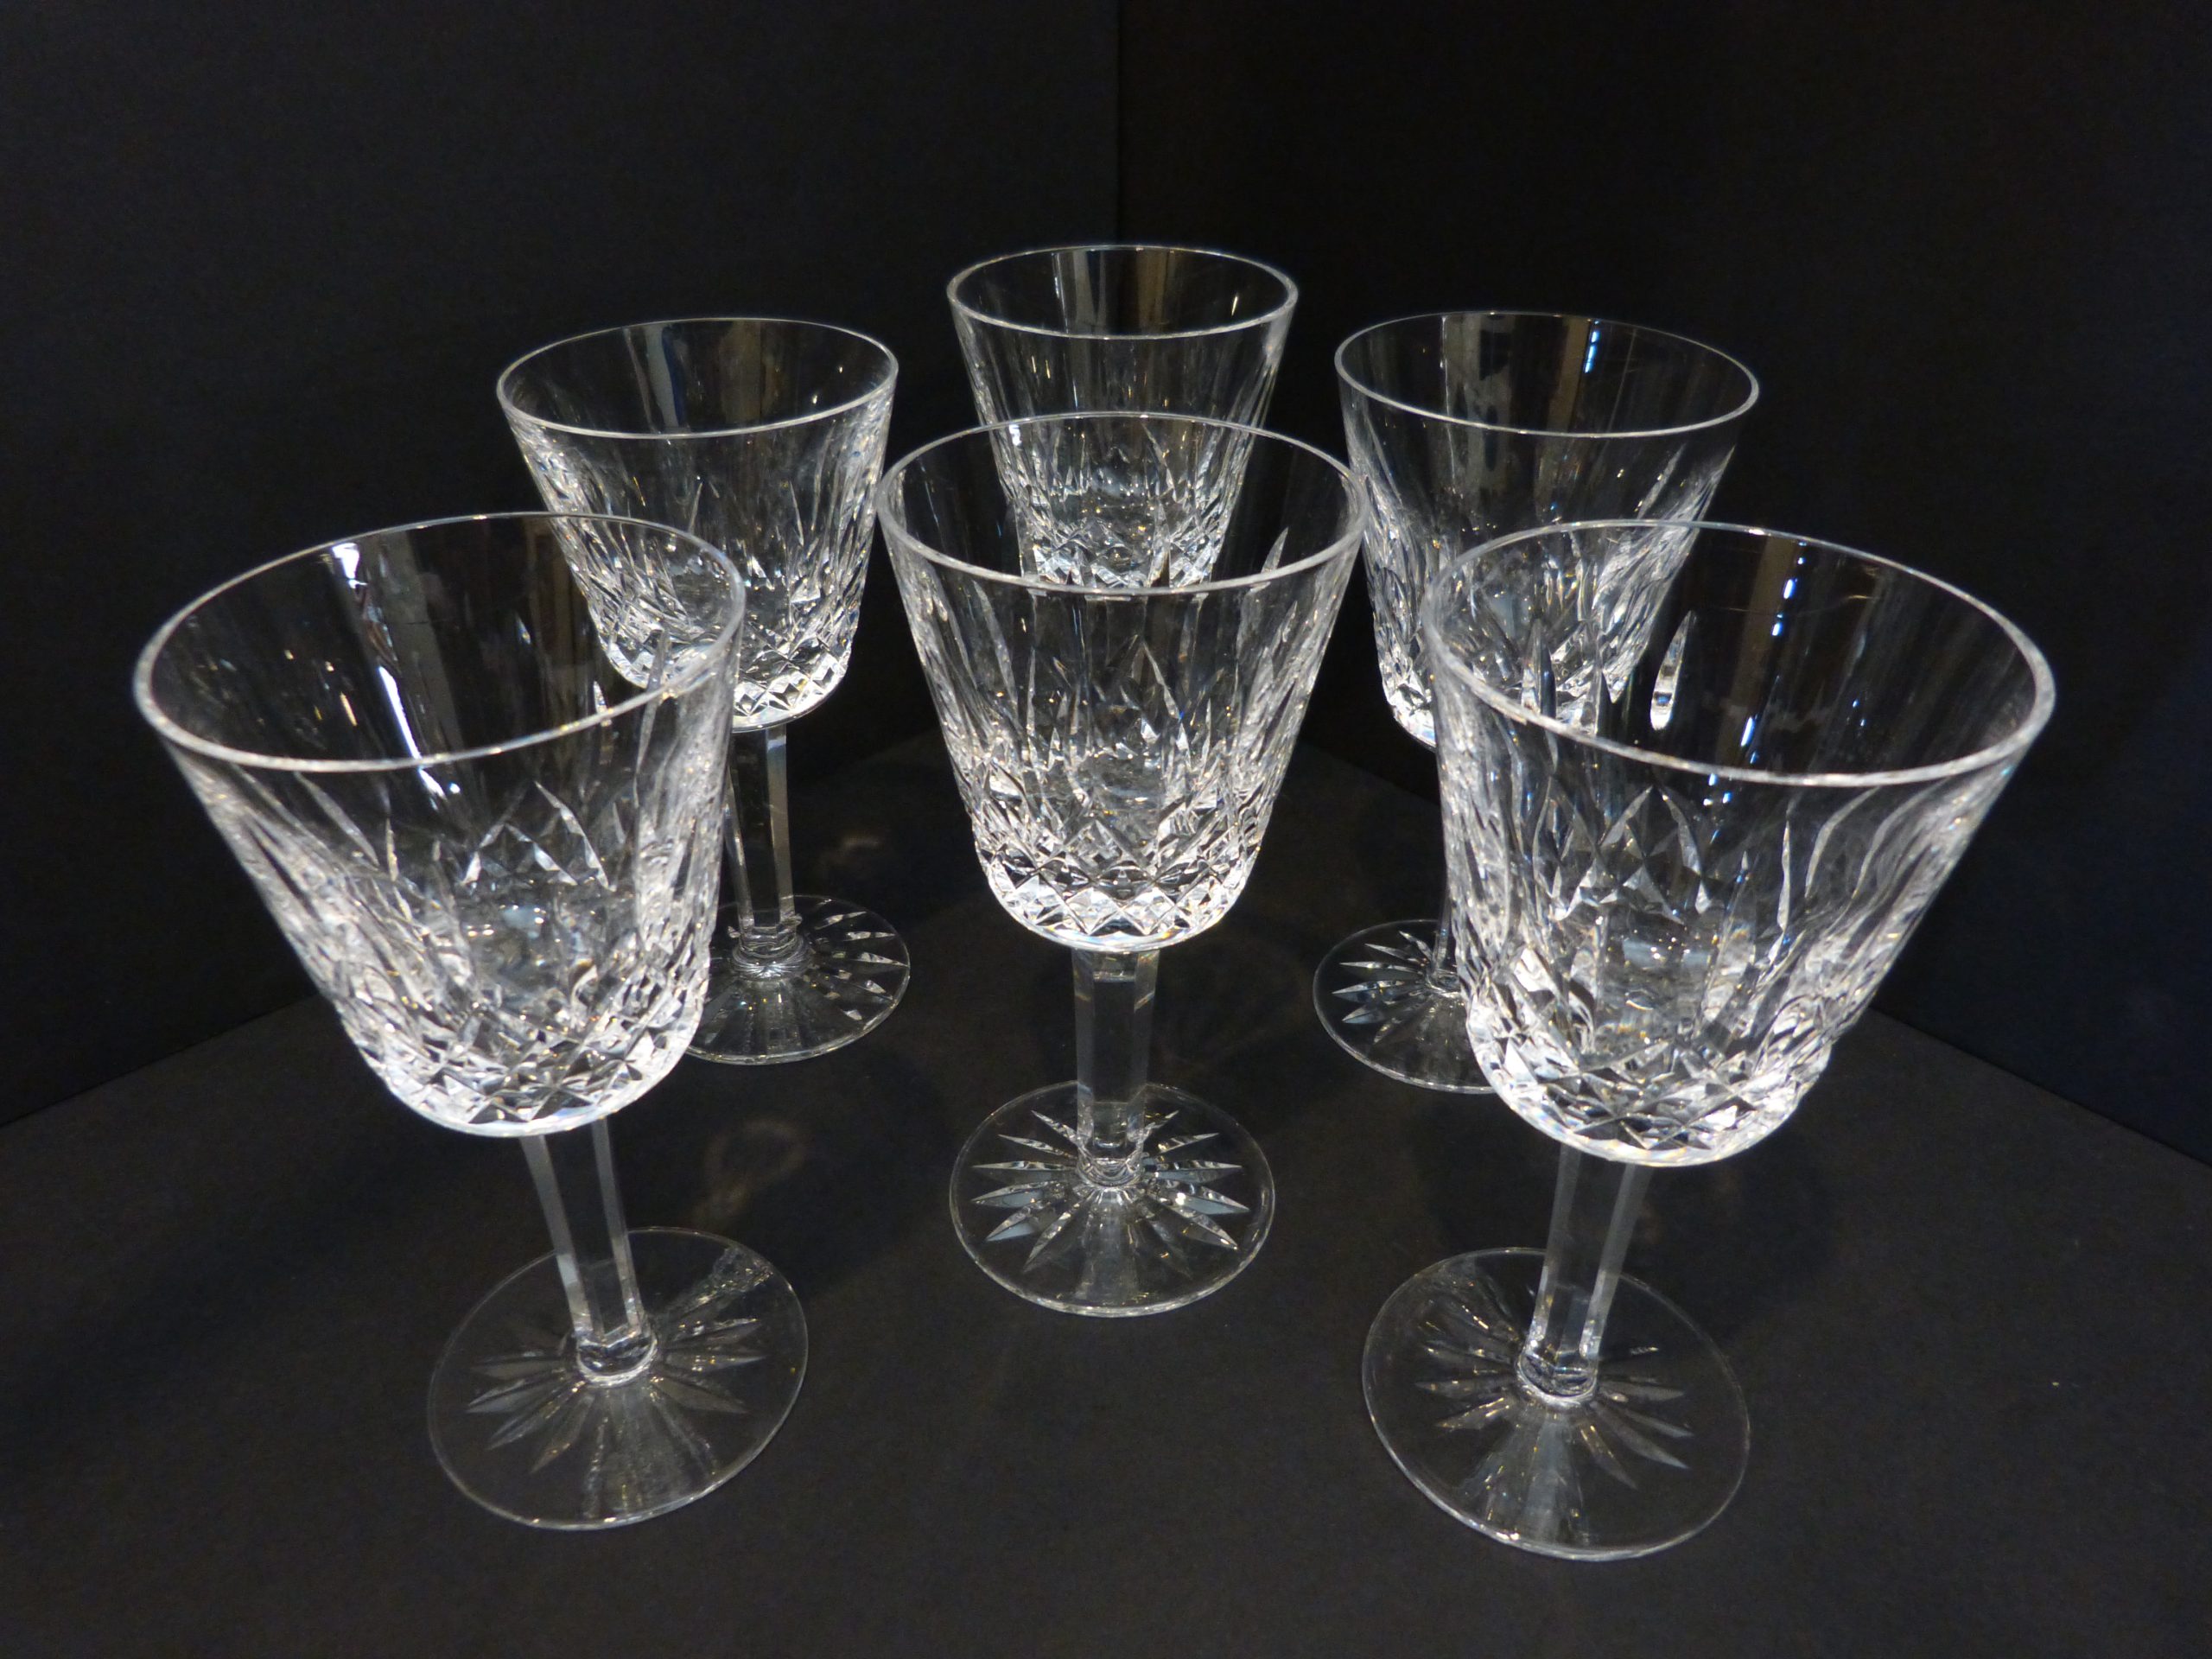 Waterford Lismore Claret Wine Glasses Set of 6 5 7/8" 6oz. The glasses are in mint condition. There are no chips, cracks or scratches. Please check photos carefully.